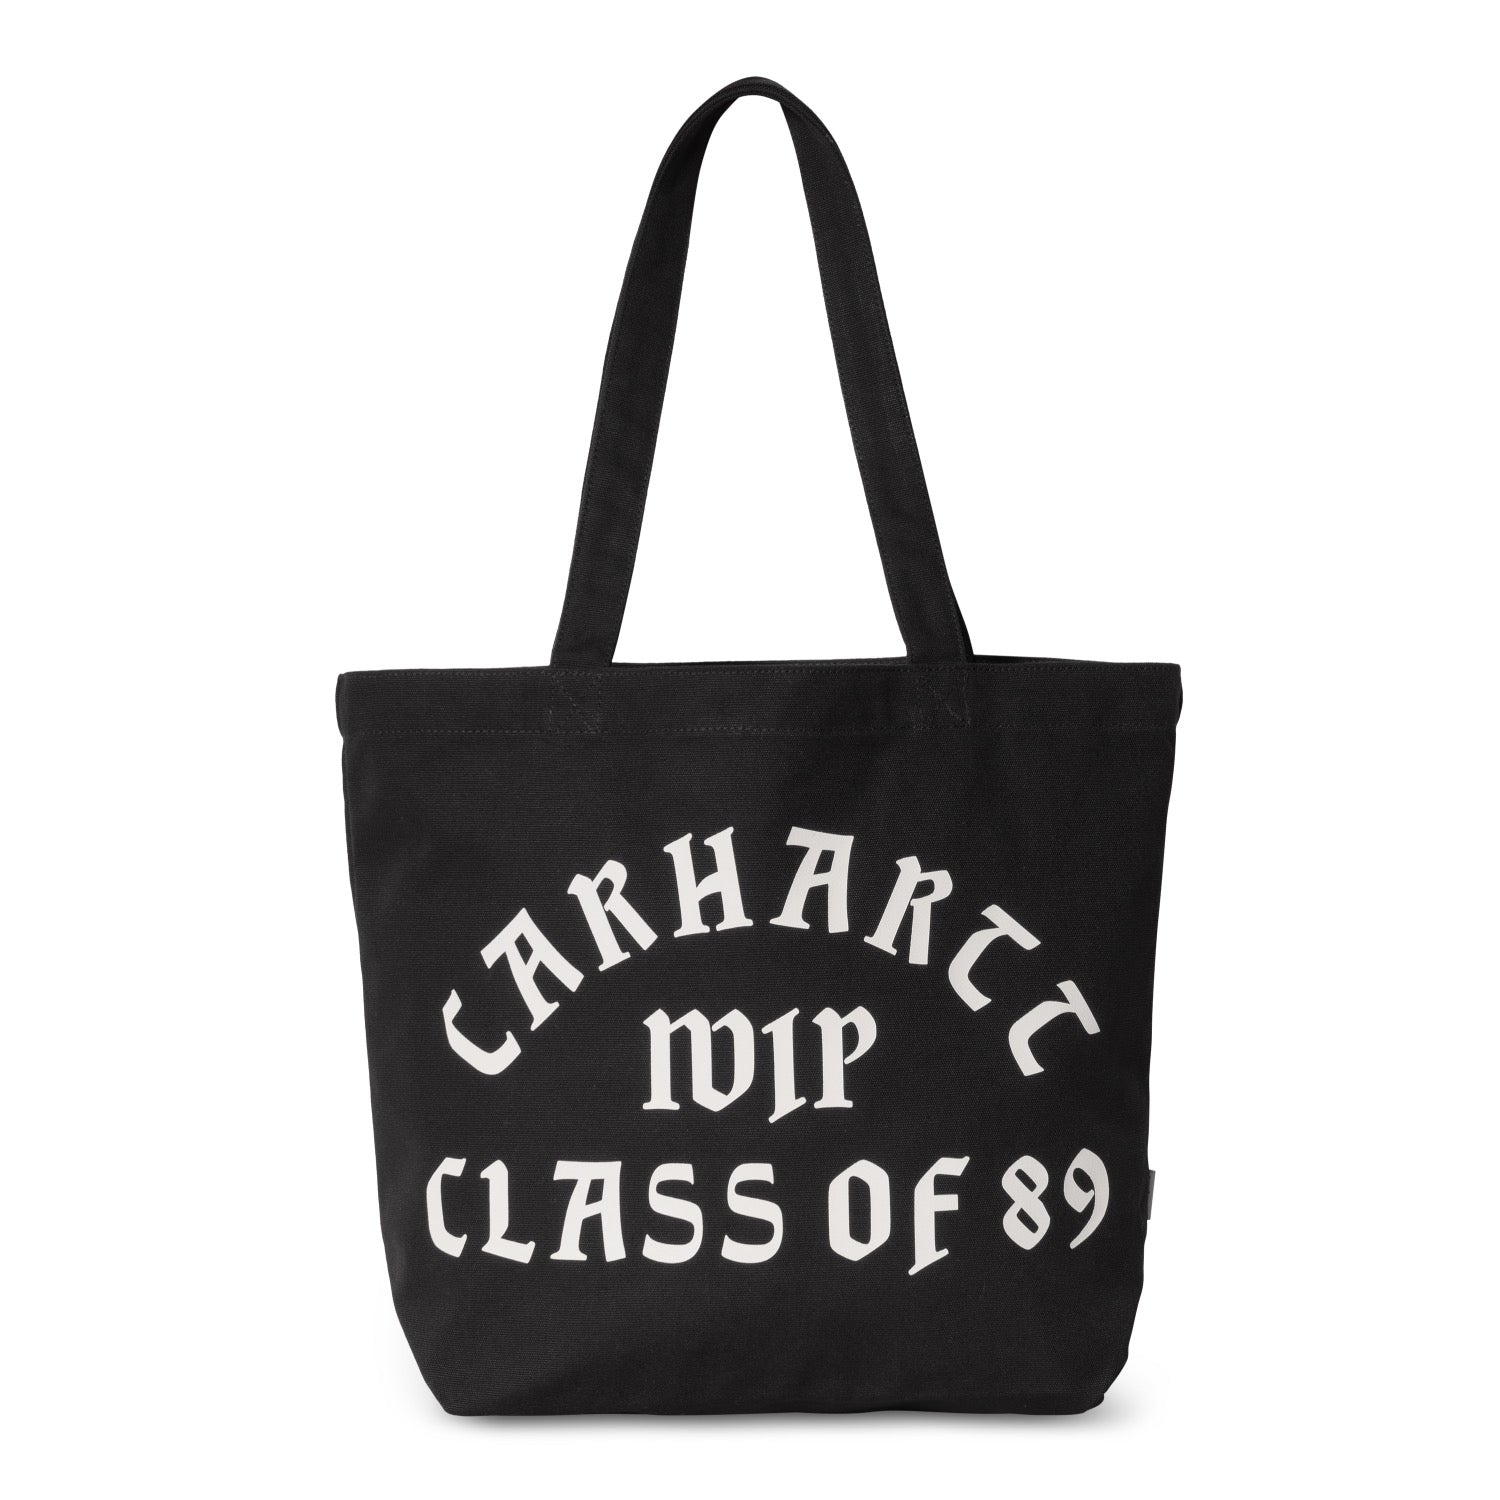 CANVAS GRAPHIC TOTE - Class Of 89 Print, Black